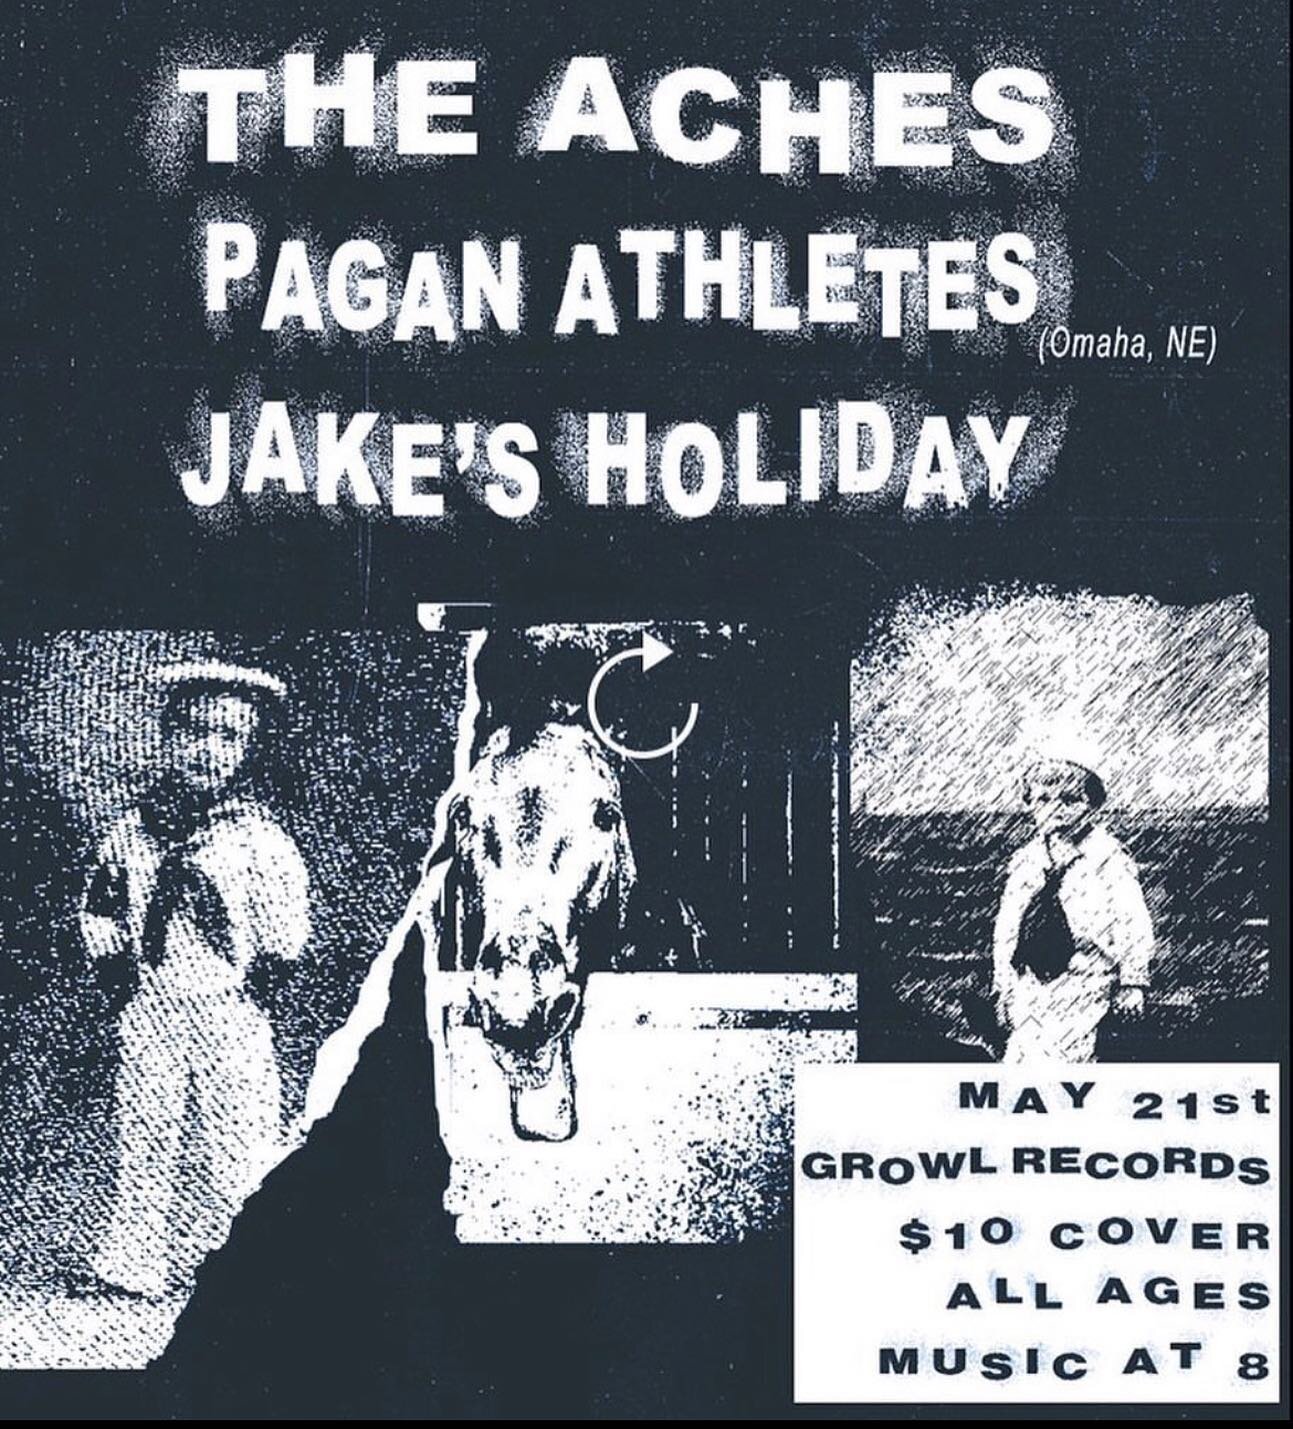 THIS WEEKEND AT GROWL RECORDS! @growlrecords GET READY FOR SOME NOISE! 

@jakesholiday AND @theachesband WILL BE PERFORMING WITH @paganathletes FROM OMAHA, NEBRASKA!

FOLLOW AND SUPPORT THESE BANDS' PAGES AS WELL AS SUPPORT LOCAL MUSIC BY COMING TO T